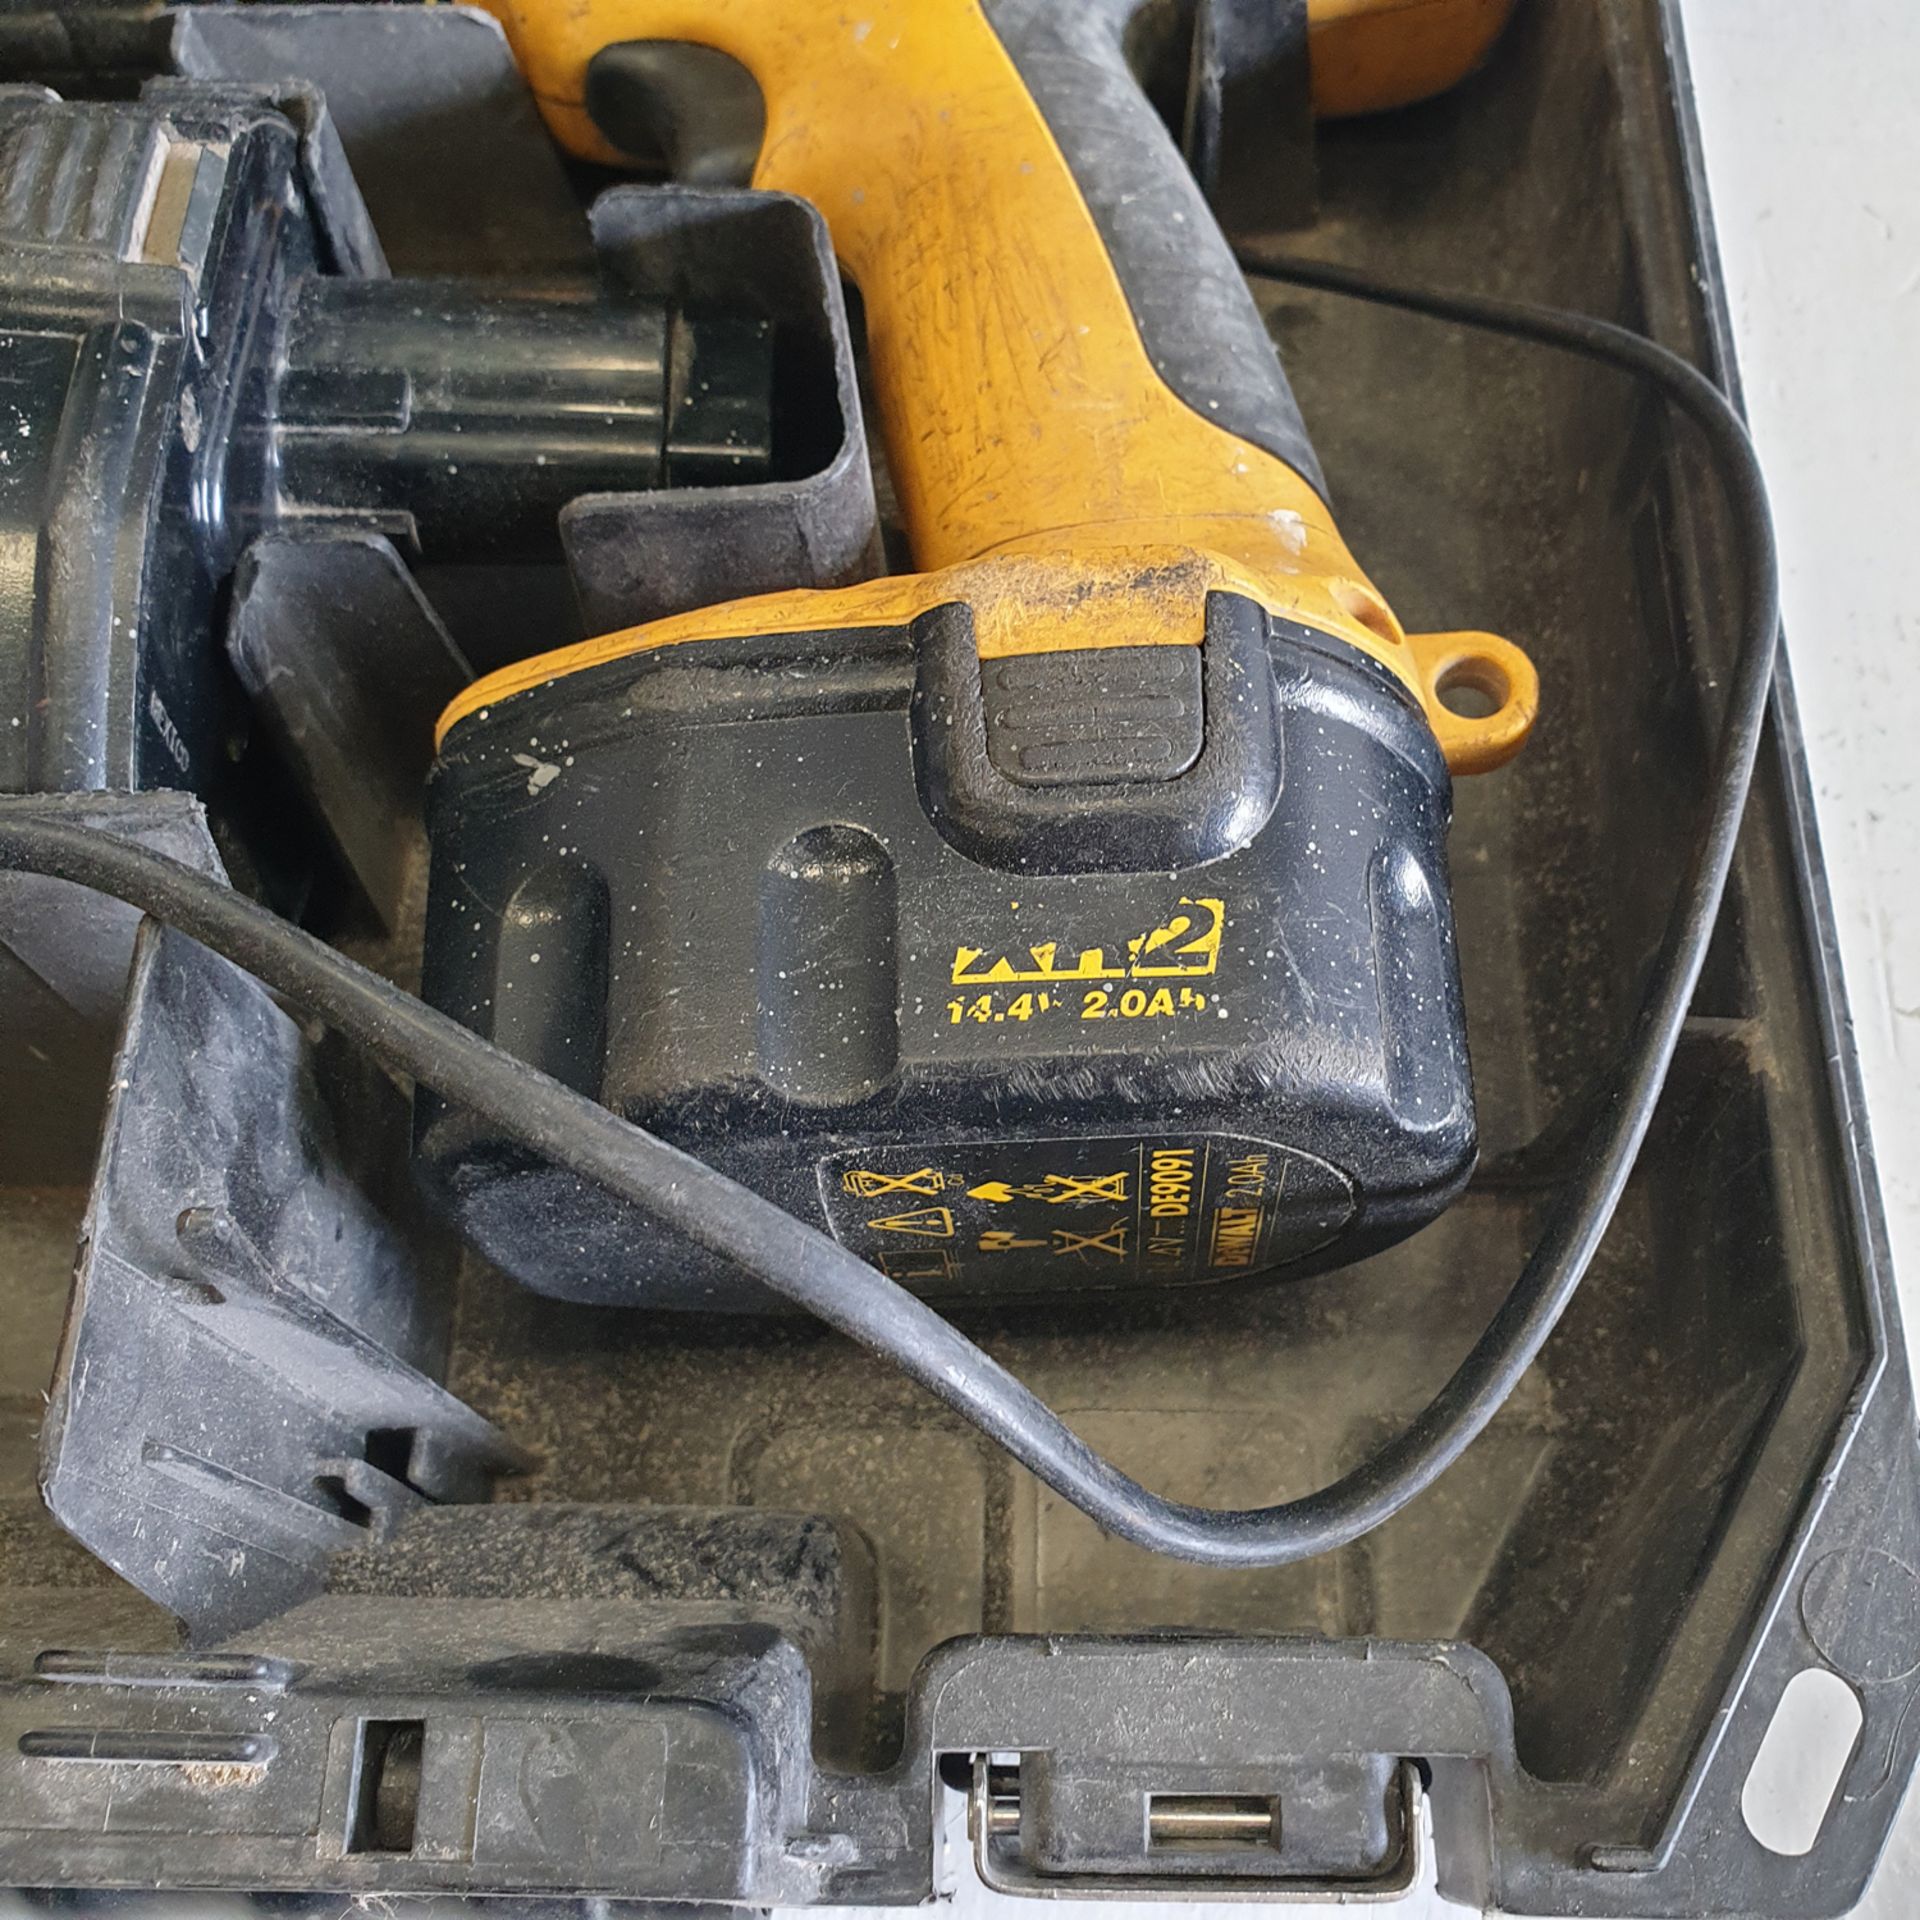 DeWALT DE9091 Drill. With Battery and Charger. In Box. - Image 3 of 4